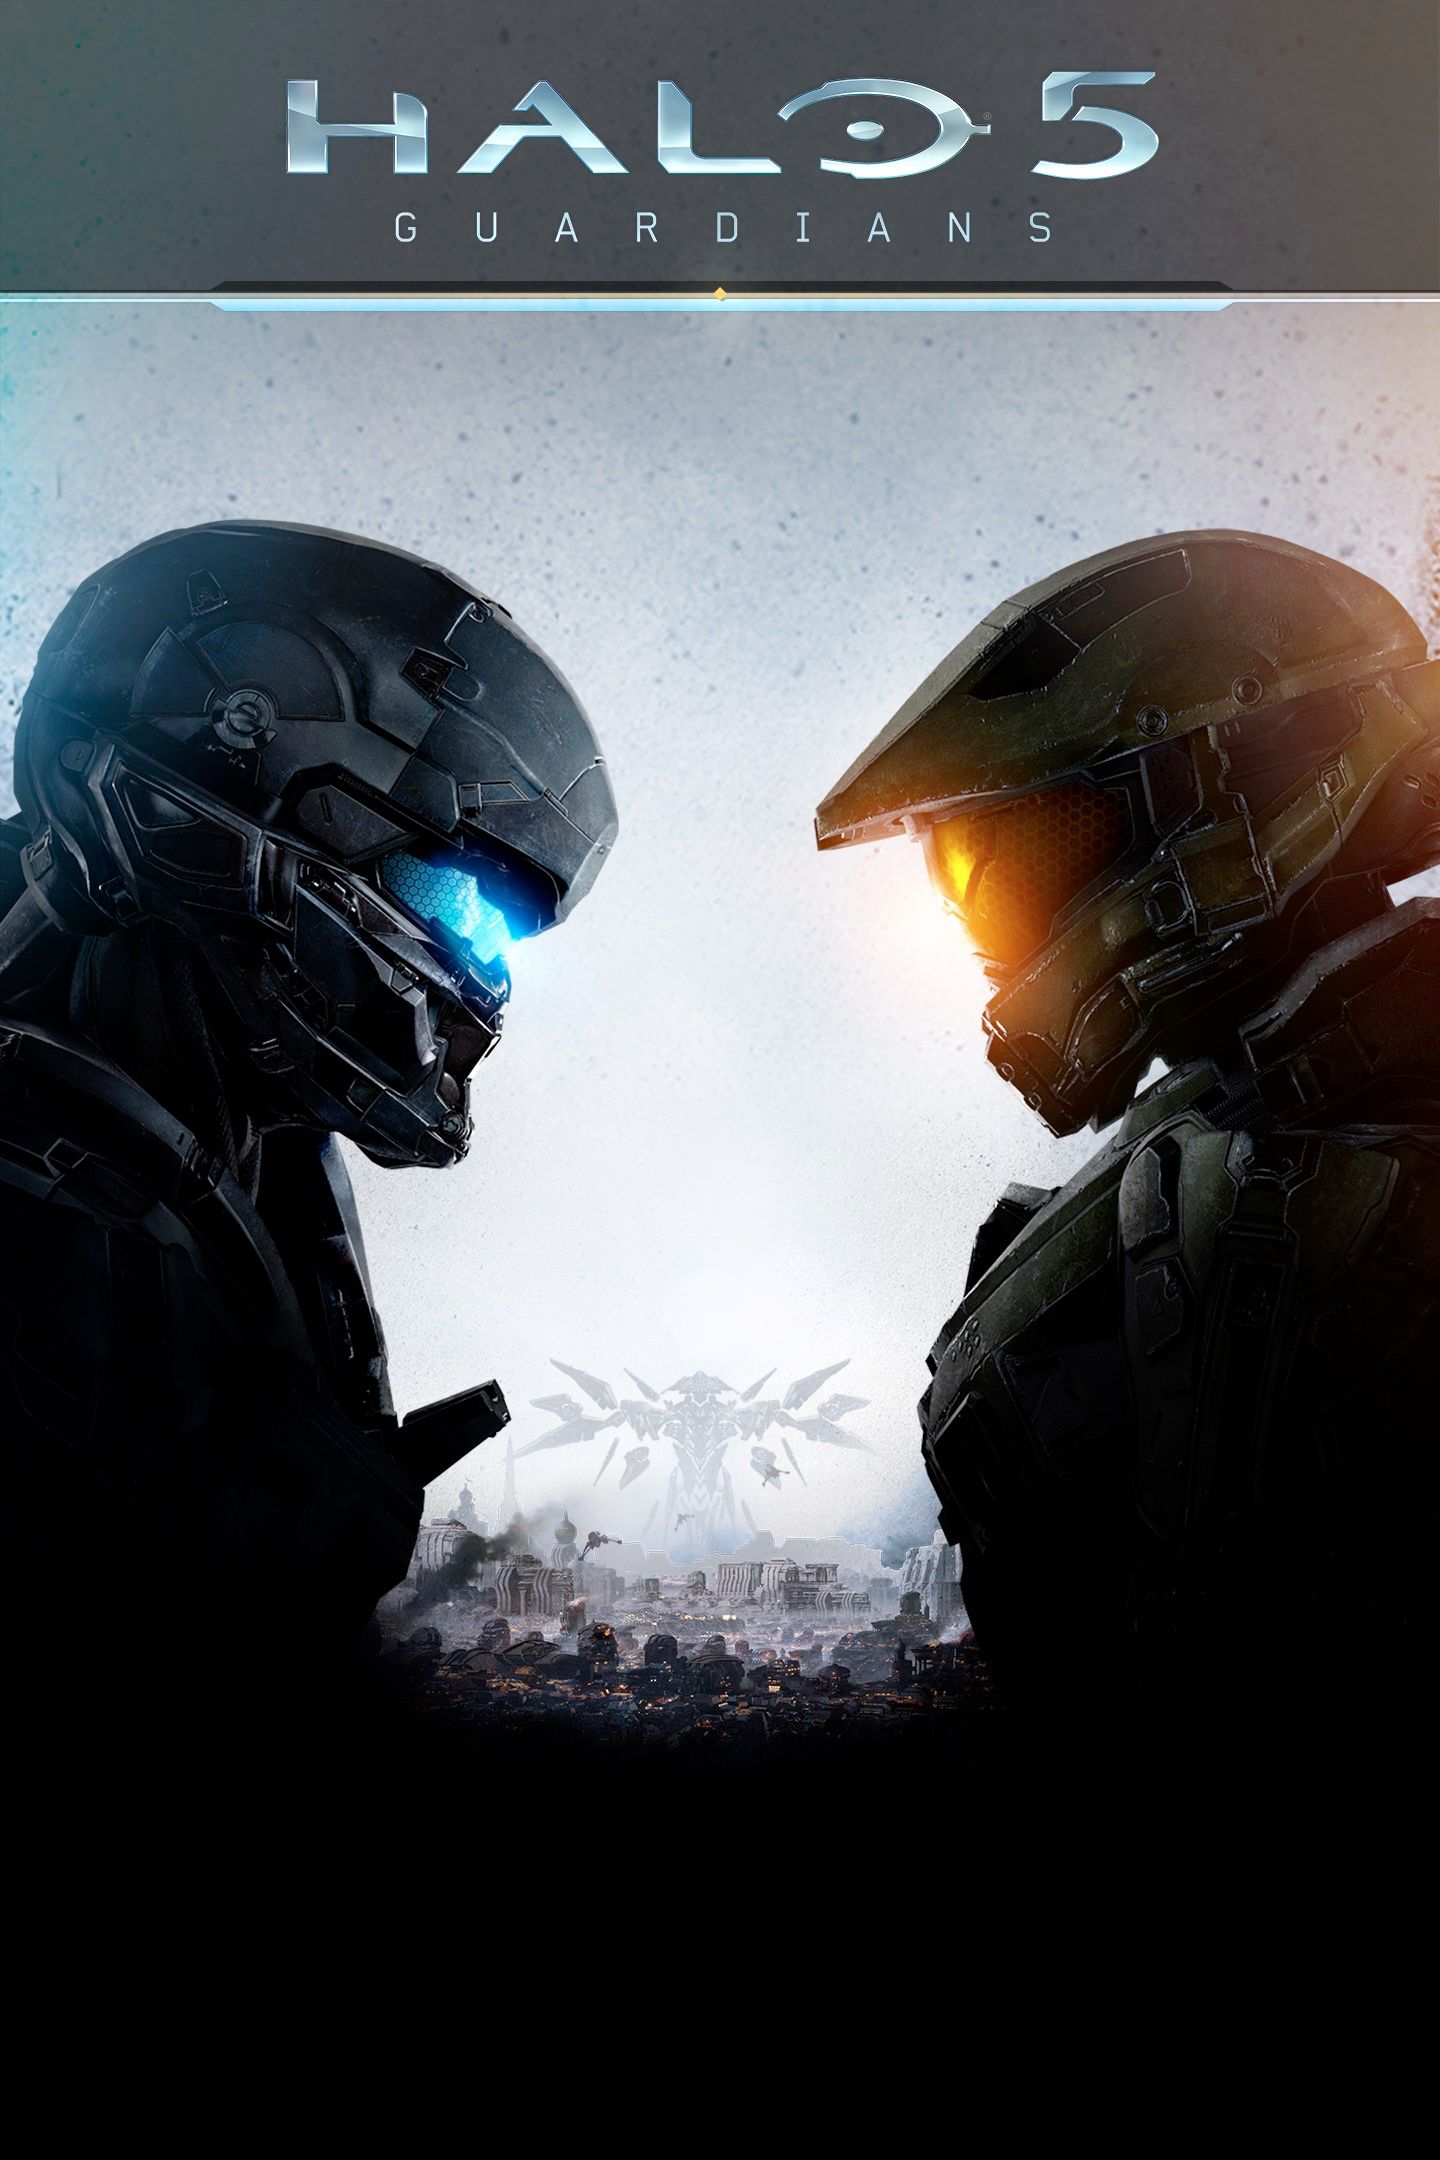 Halo 5 Guardians Game Poster